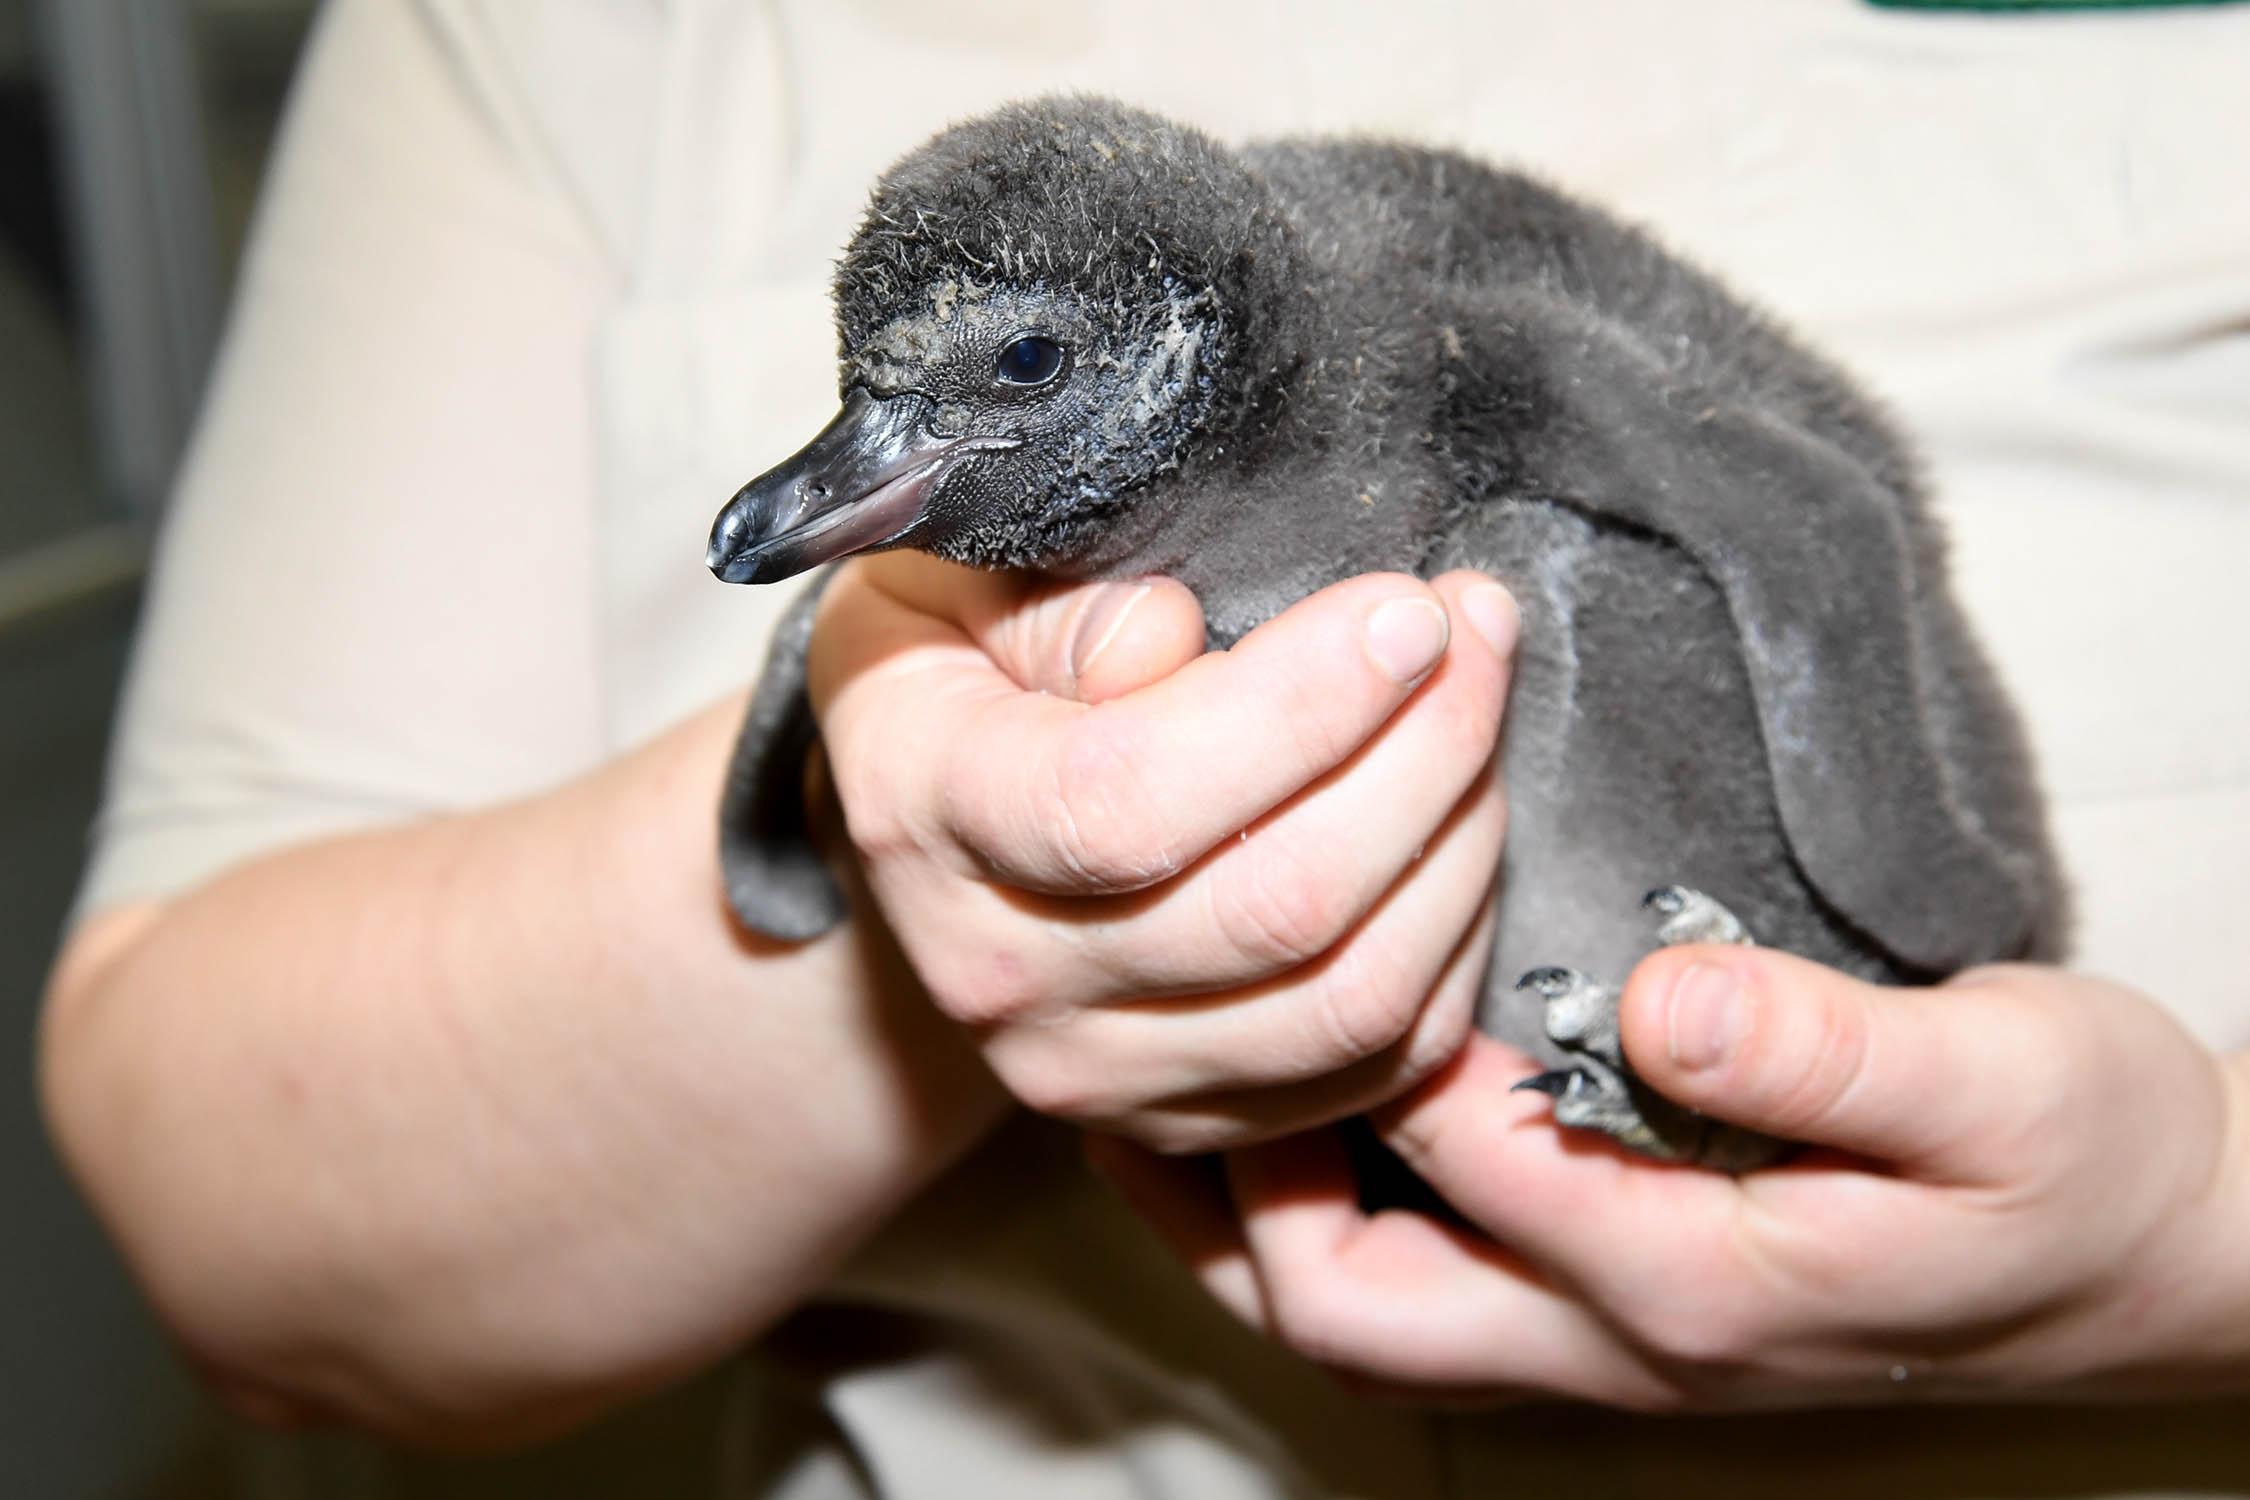 A Humboldt penguin chick hatched Feb. 12 at Brookfield Zoo. (Jim Schulz / Chicago Zoological Society) 